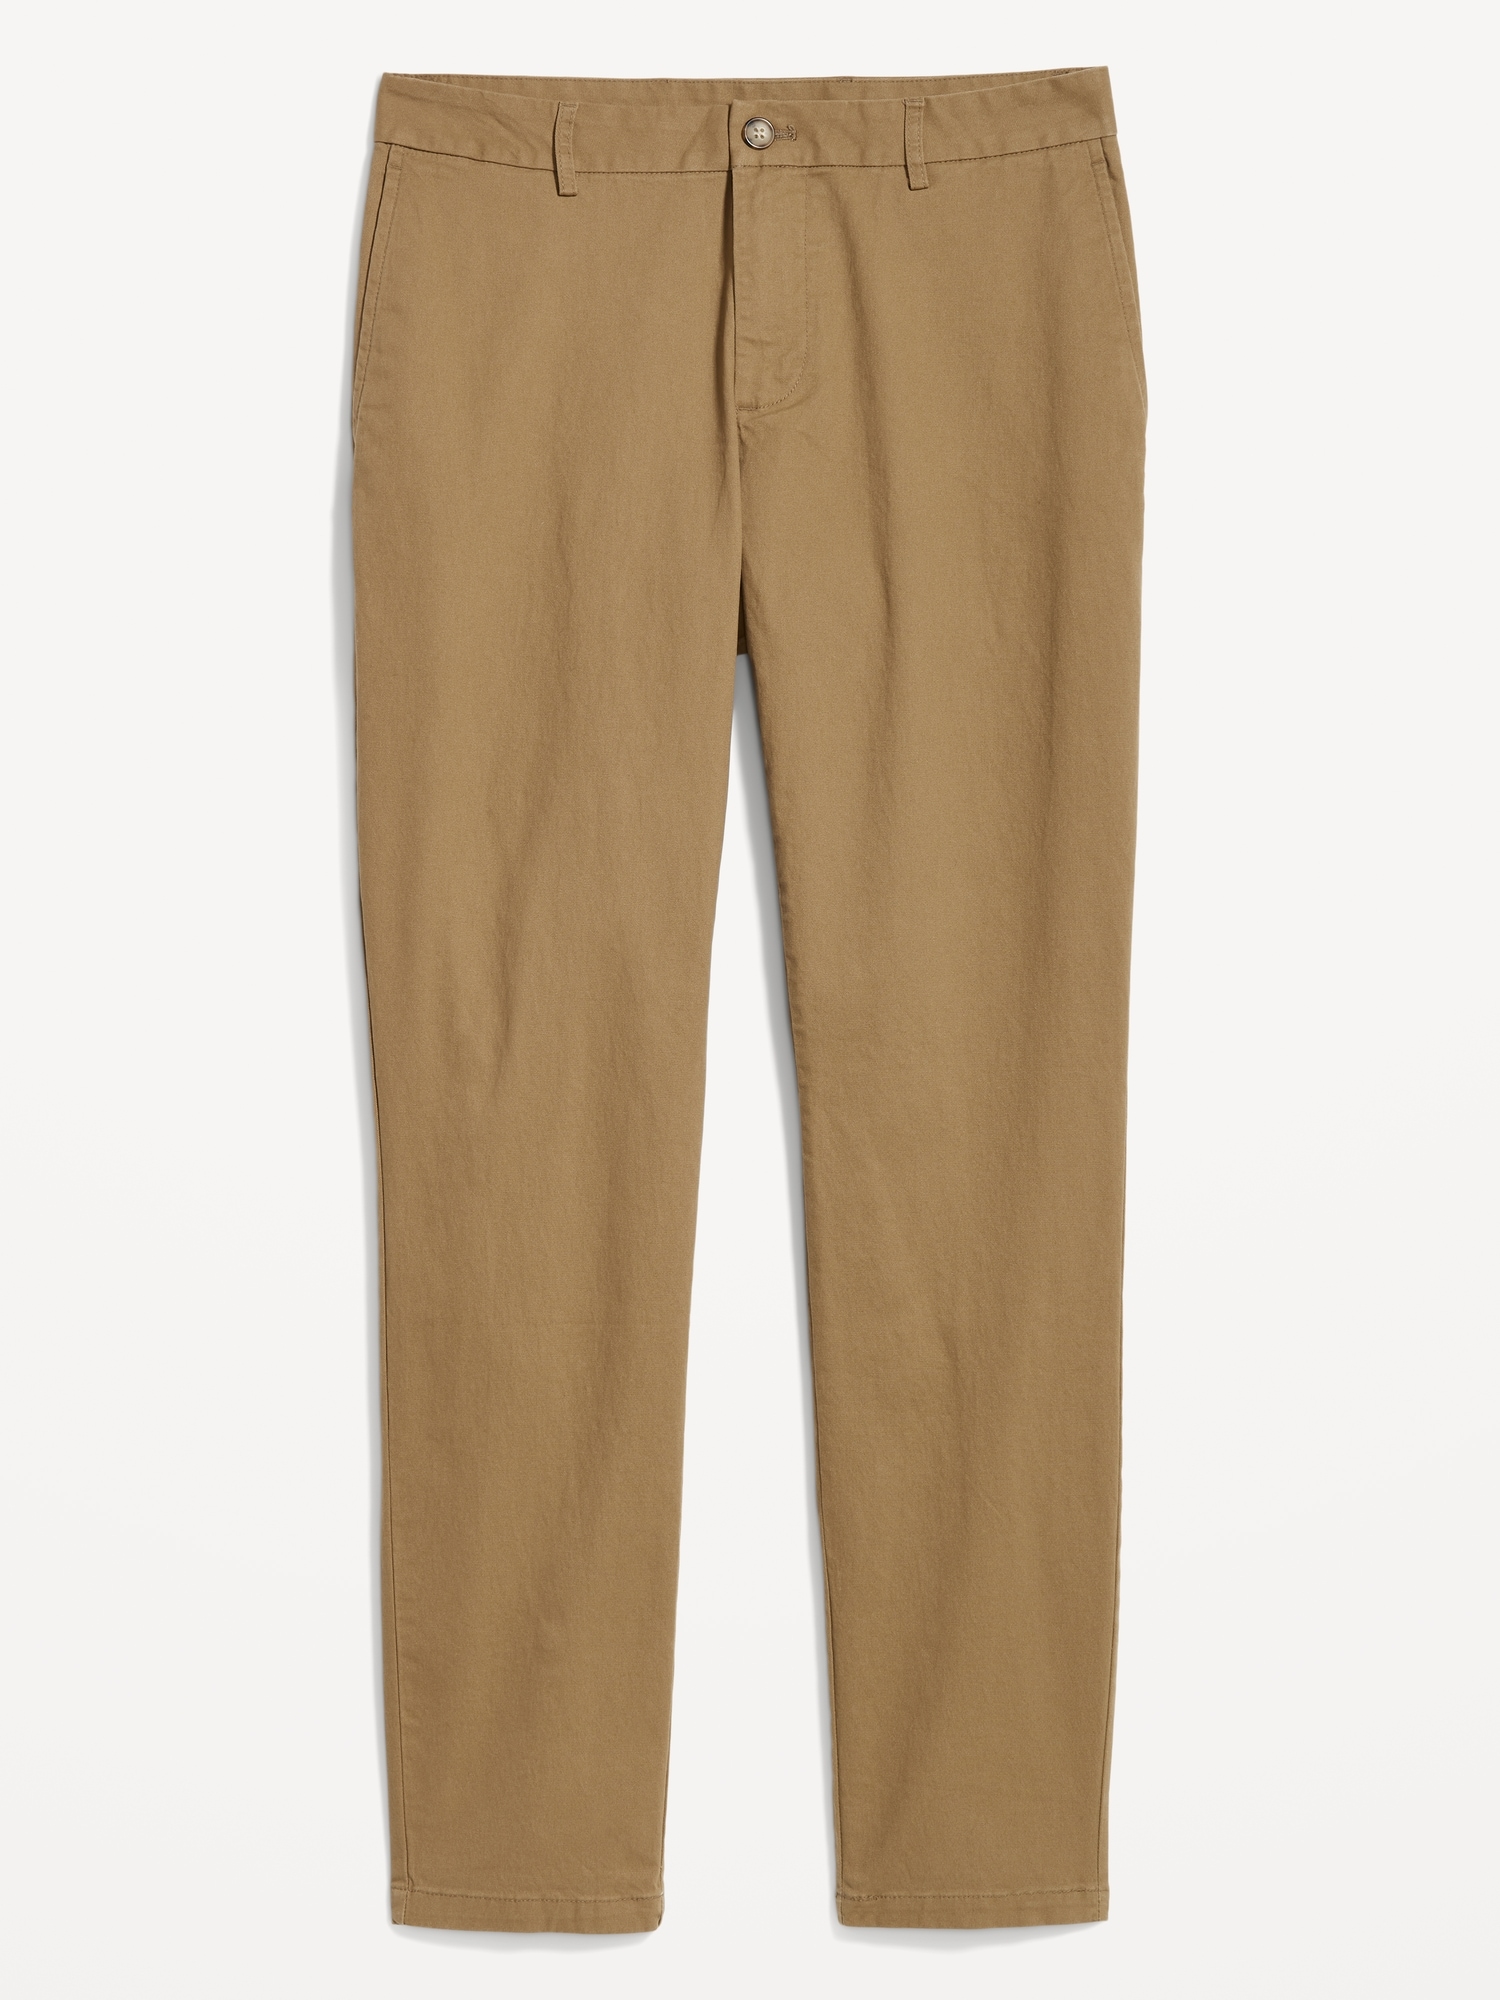 Old Navy Built-In-Flex Pants 34x34 Brown Twill Straight Stretch